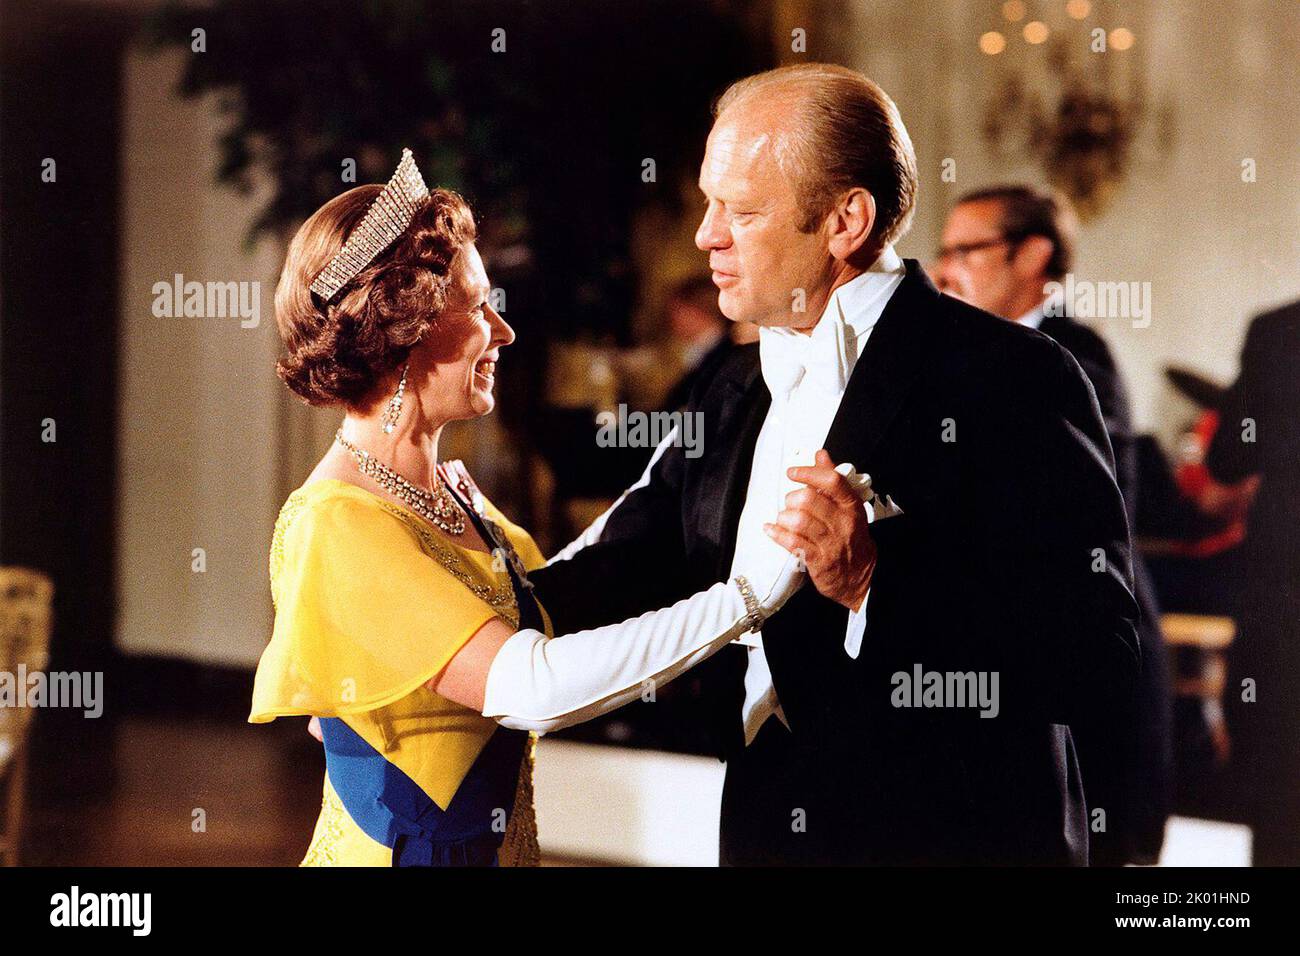 Photograph of President Gerald Ford dancing with Queen Elizabeth II during a State Dinner held in her honor 1976 - photo by Ricardo Thomas Stock Photo